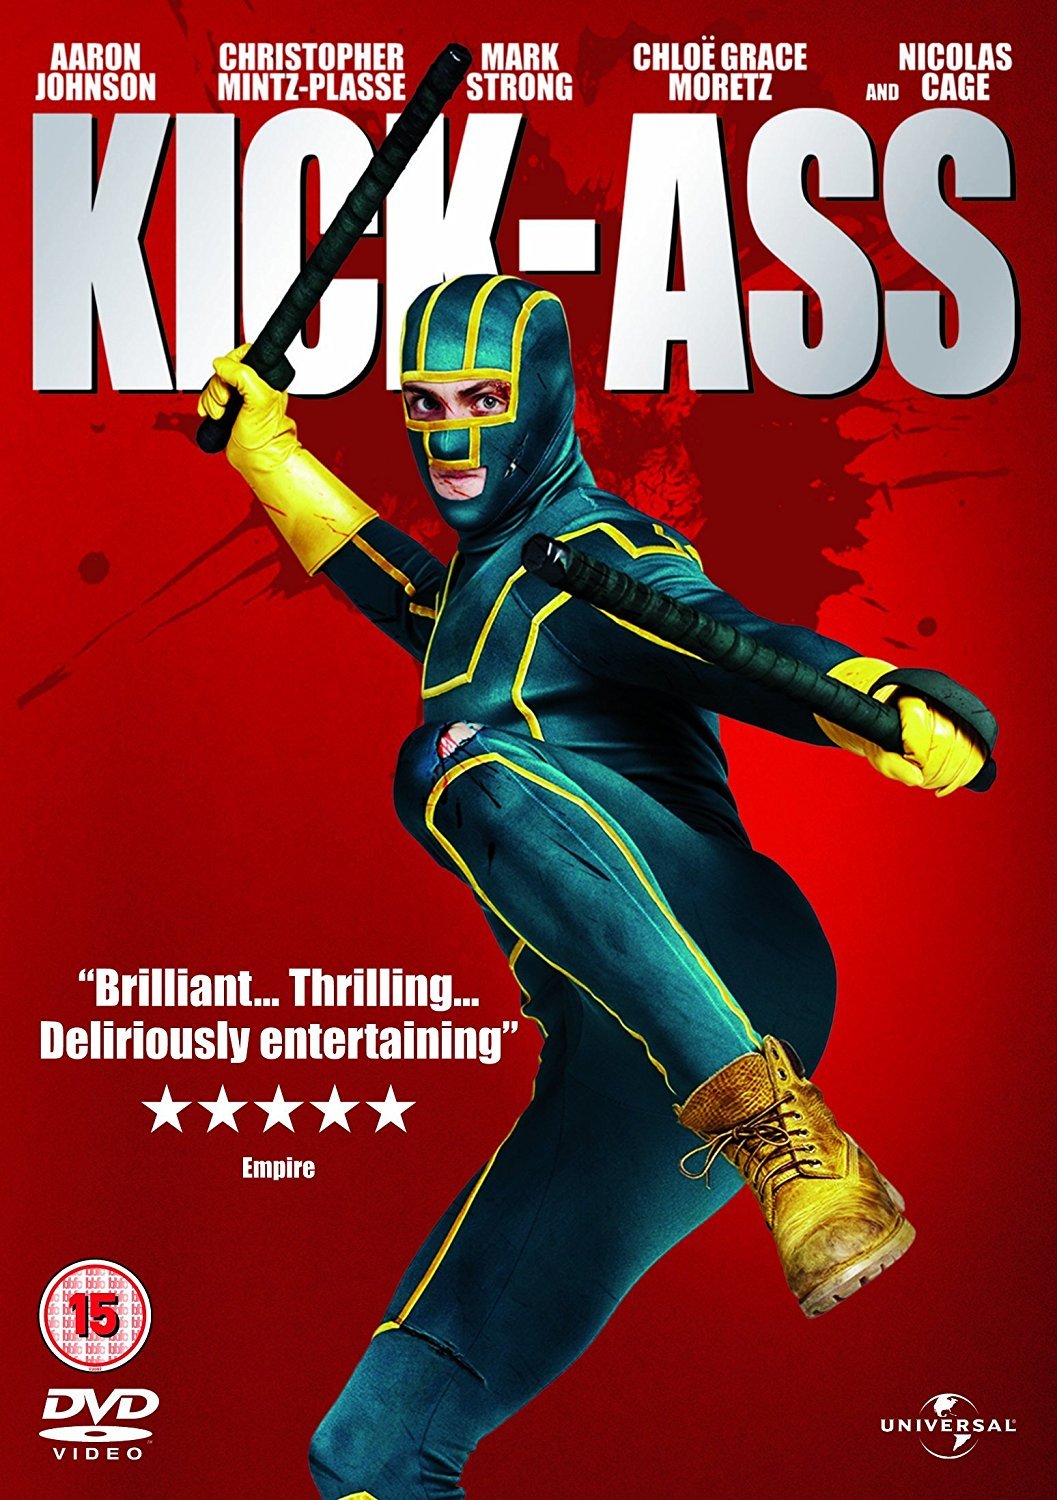 You are currently viewing Notes On A Film: Kick-Ass